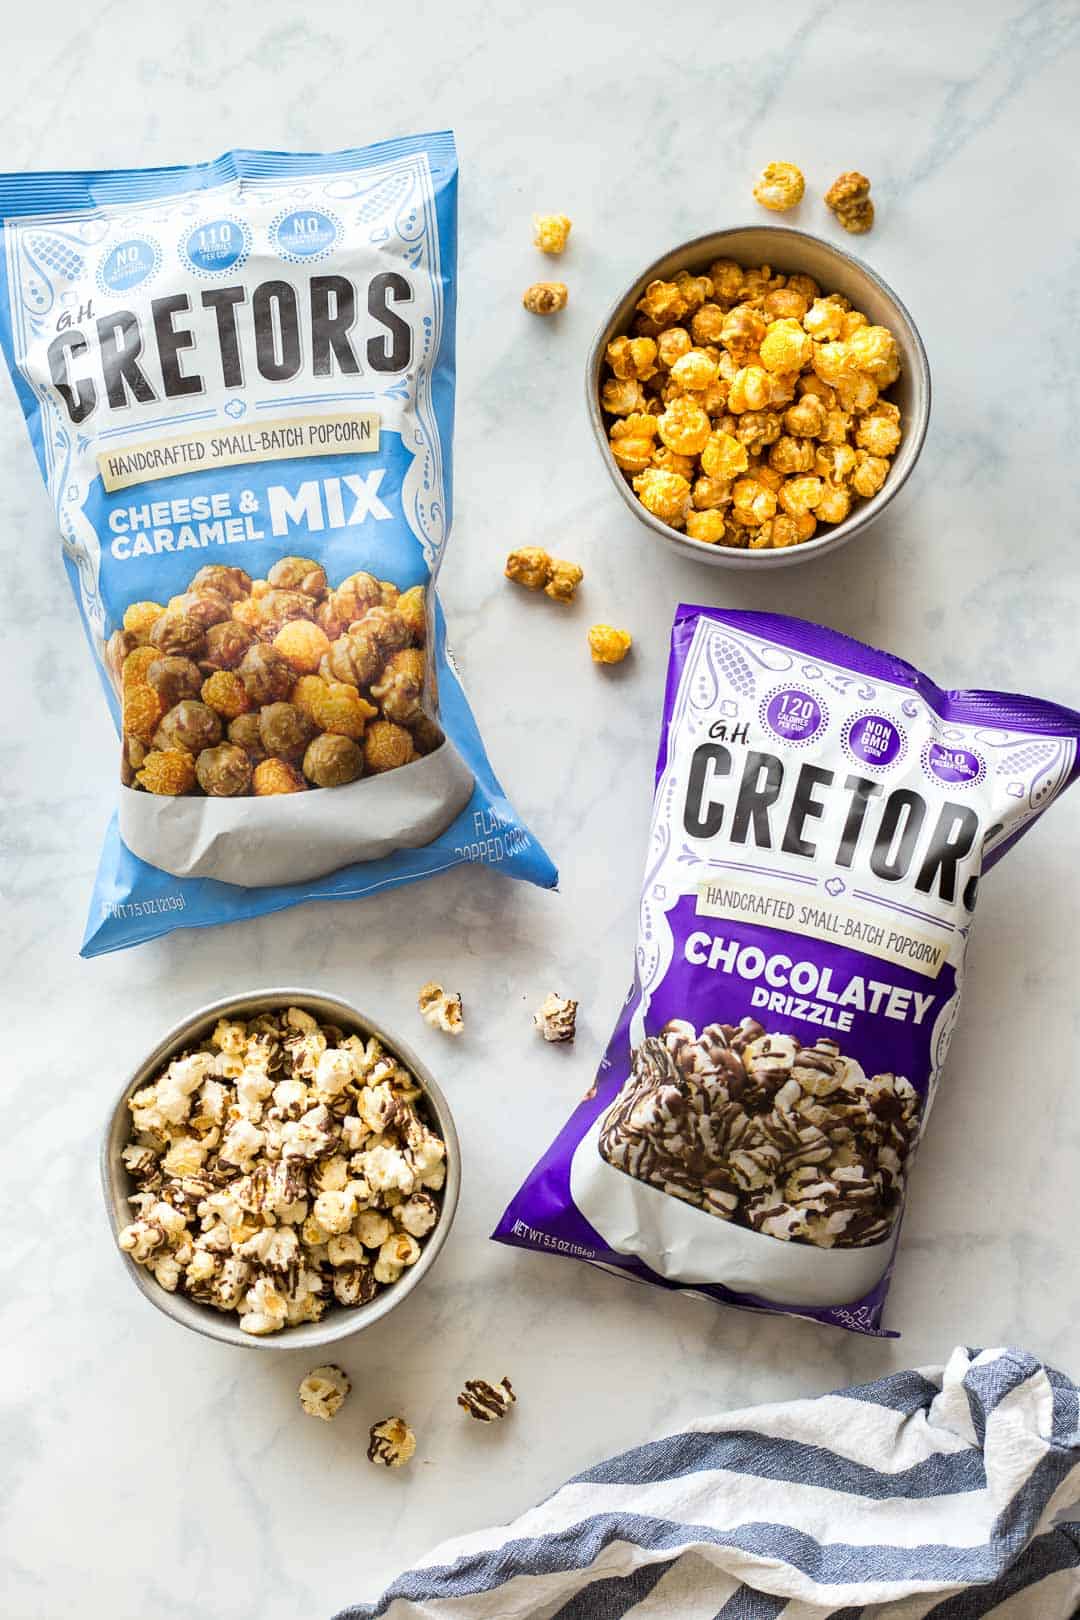 2 bags of G.H. Cretors Handcrafted & Small-batch Gourmet Popcorn